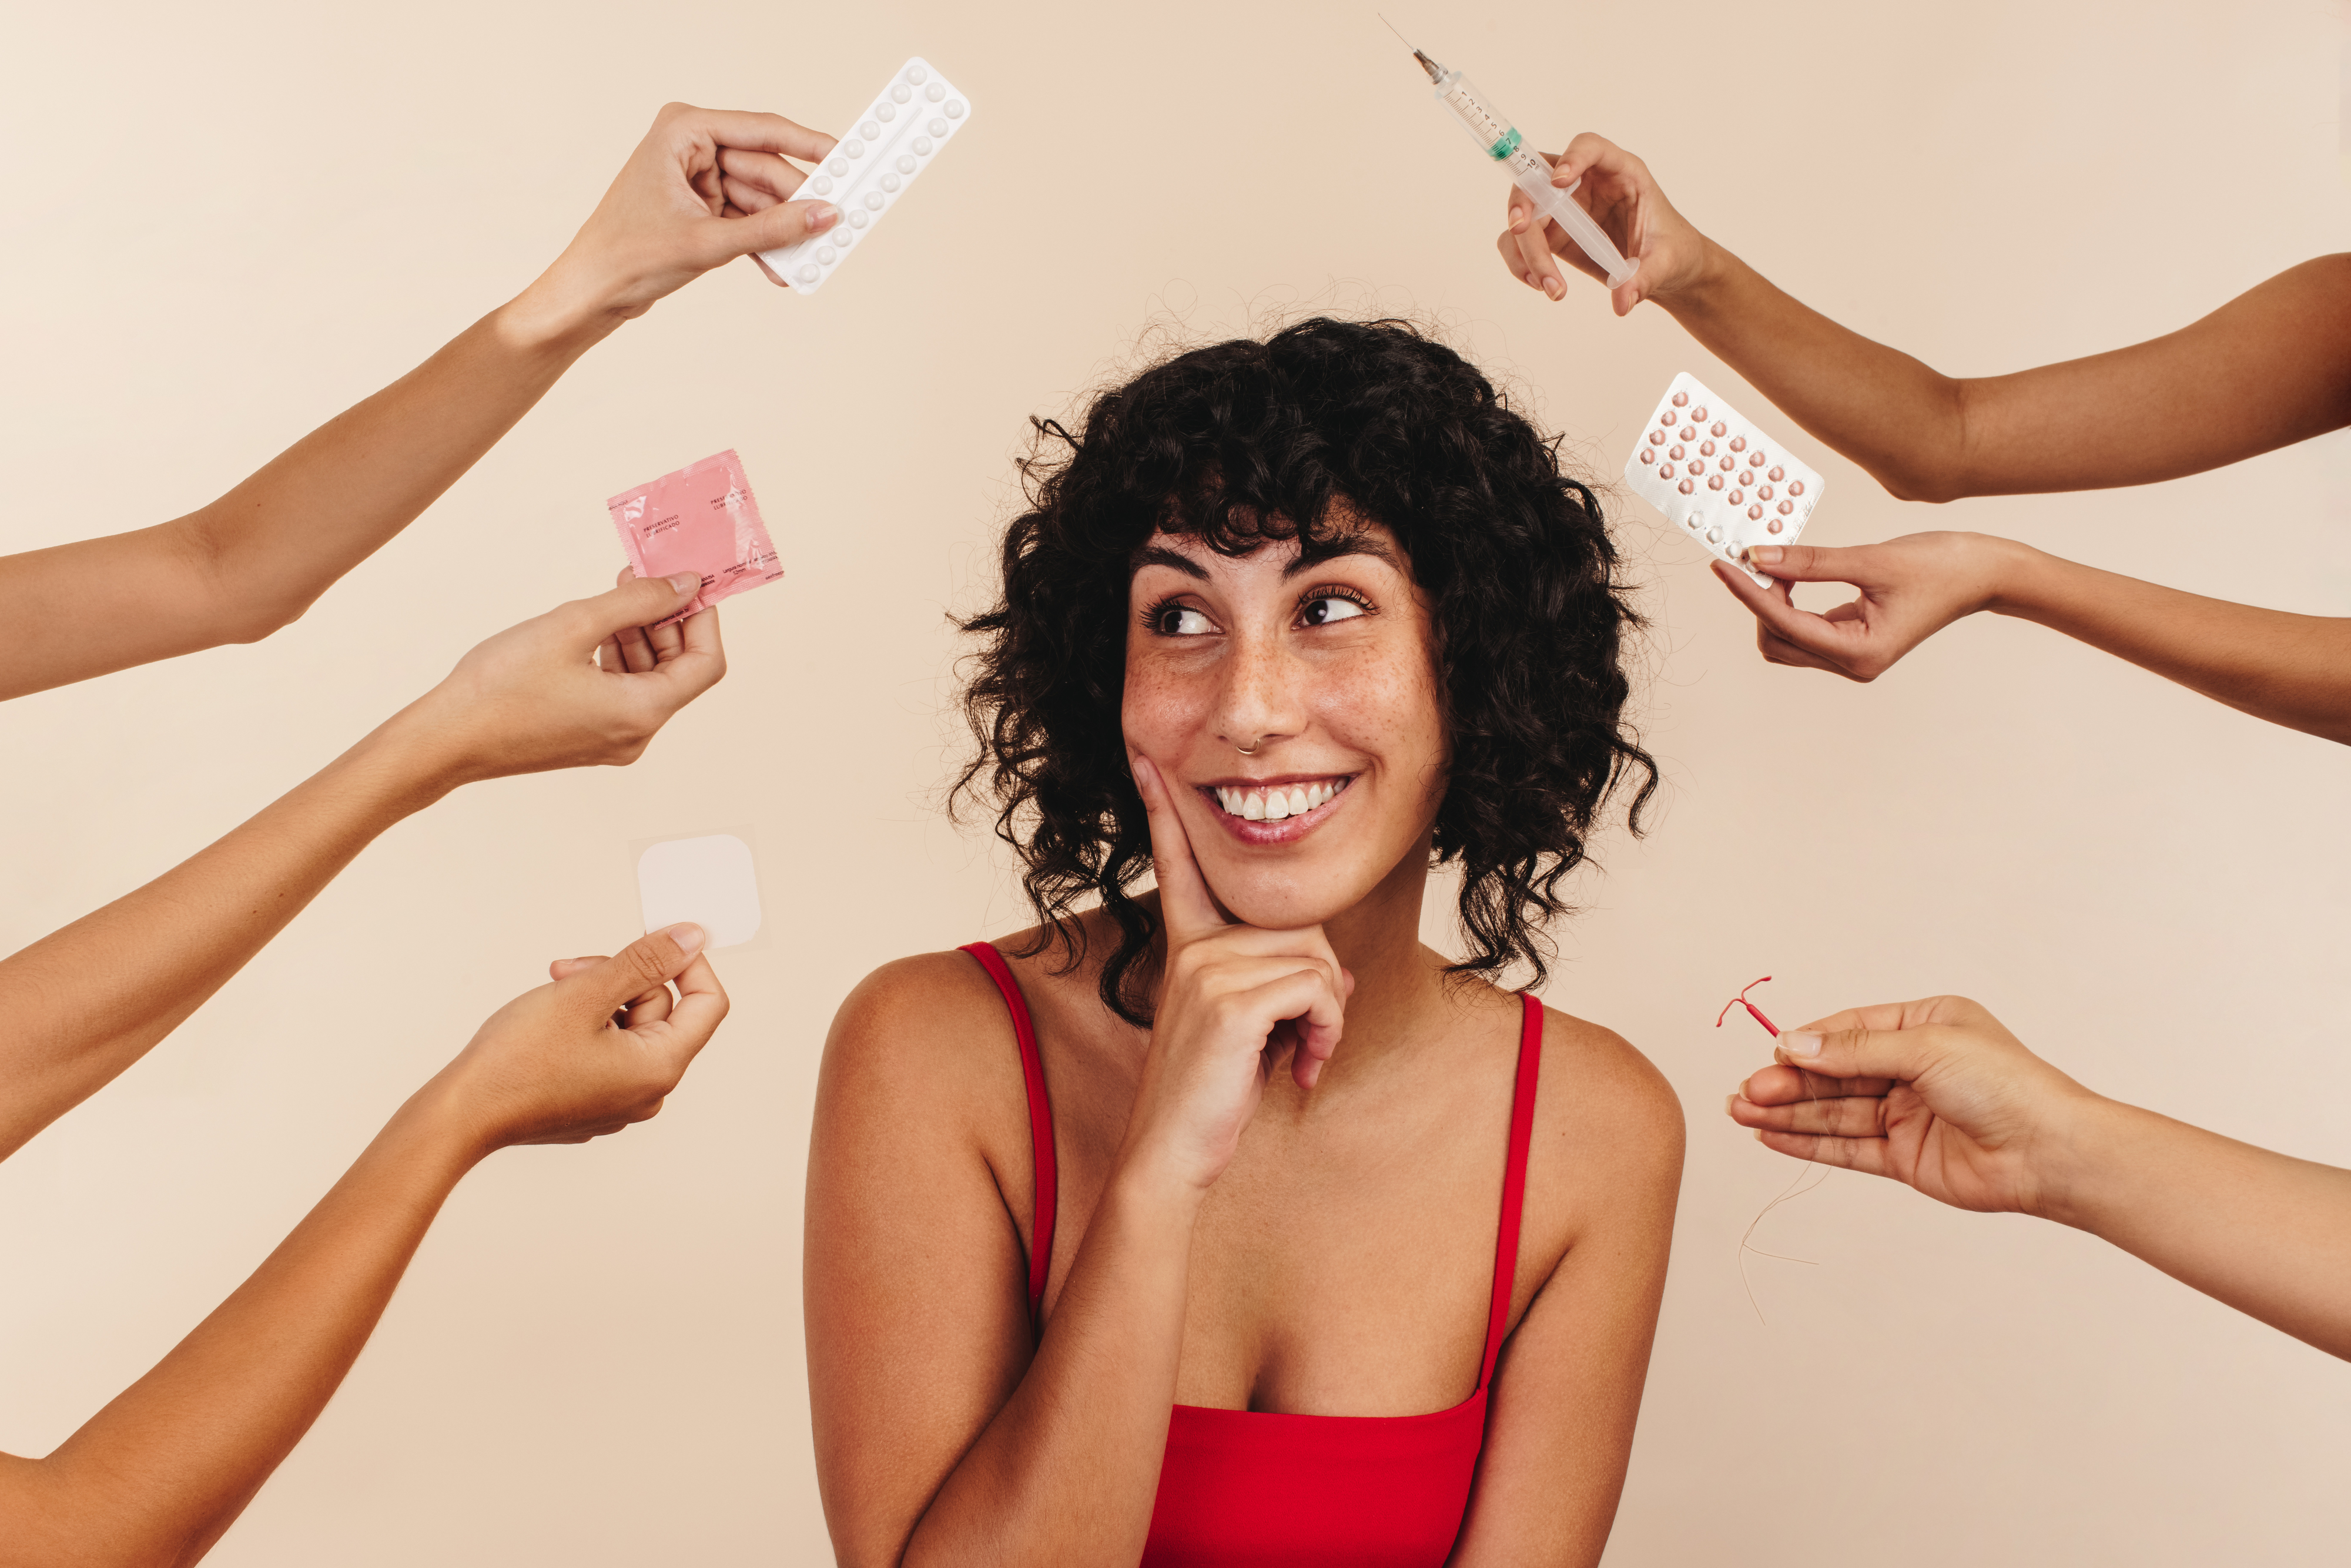 A woman being offered an assortment of contraceptives